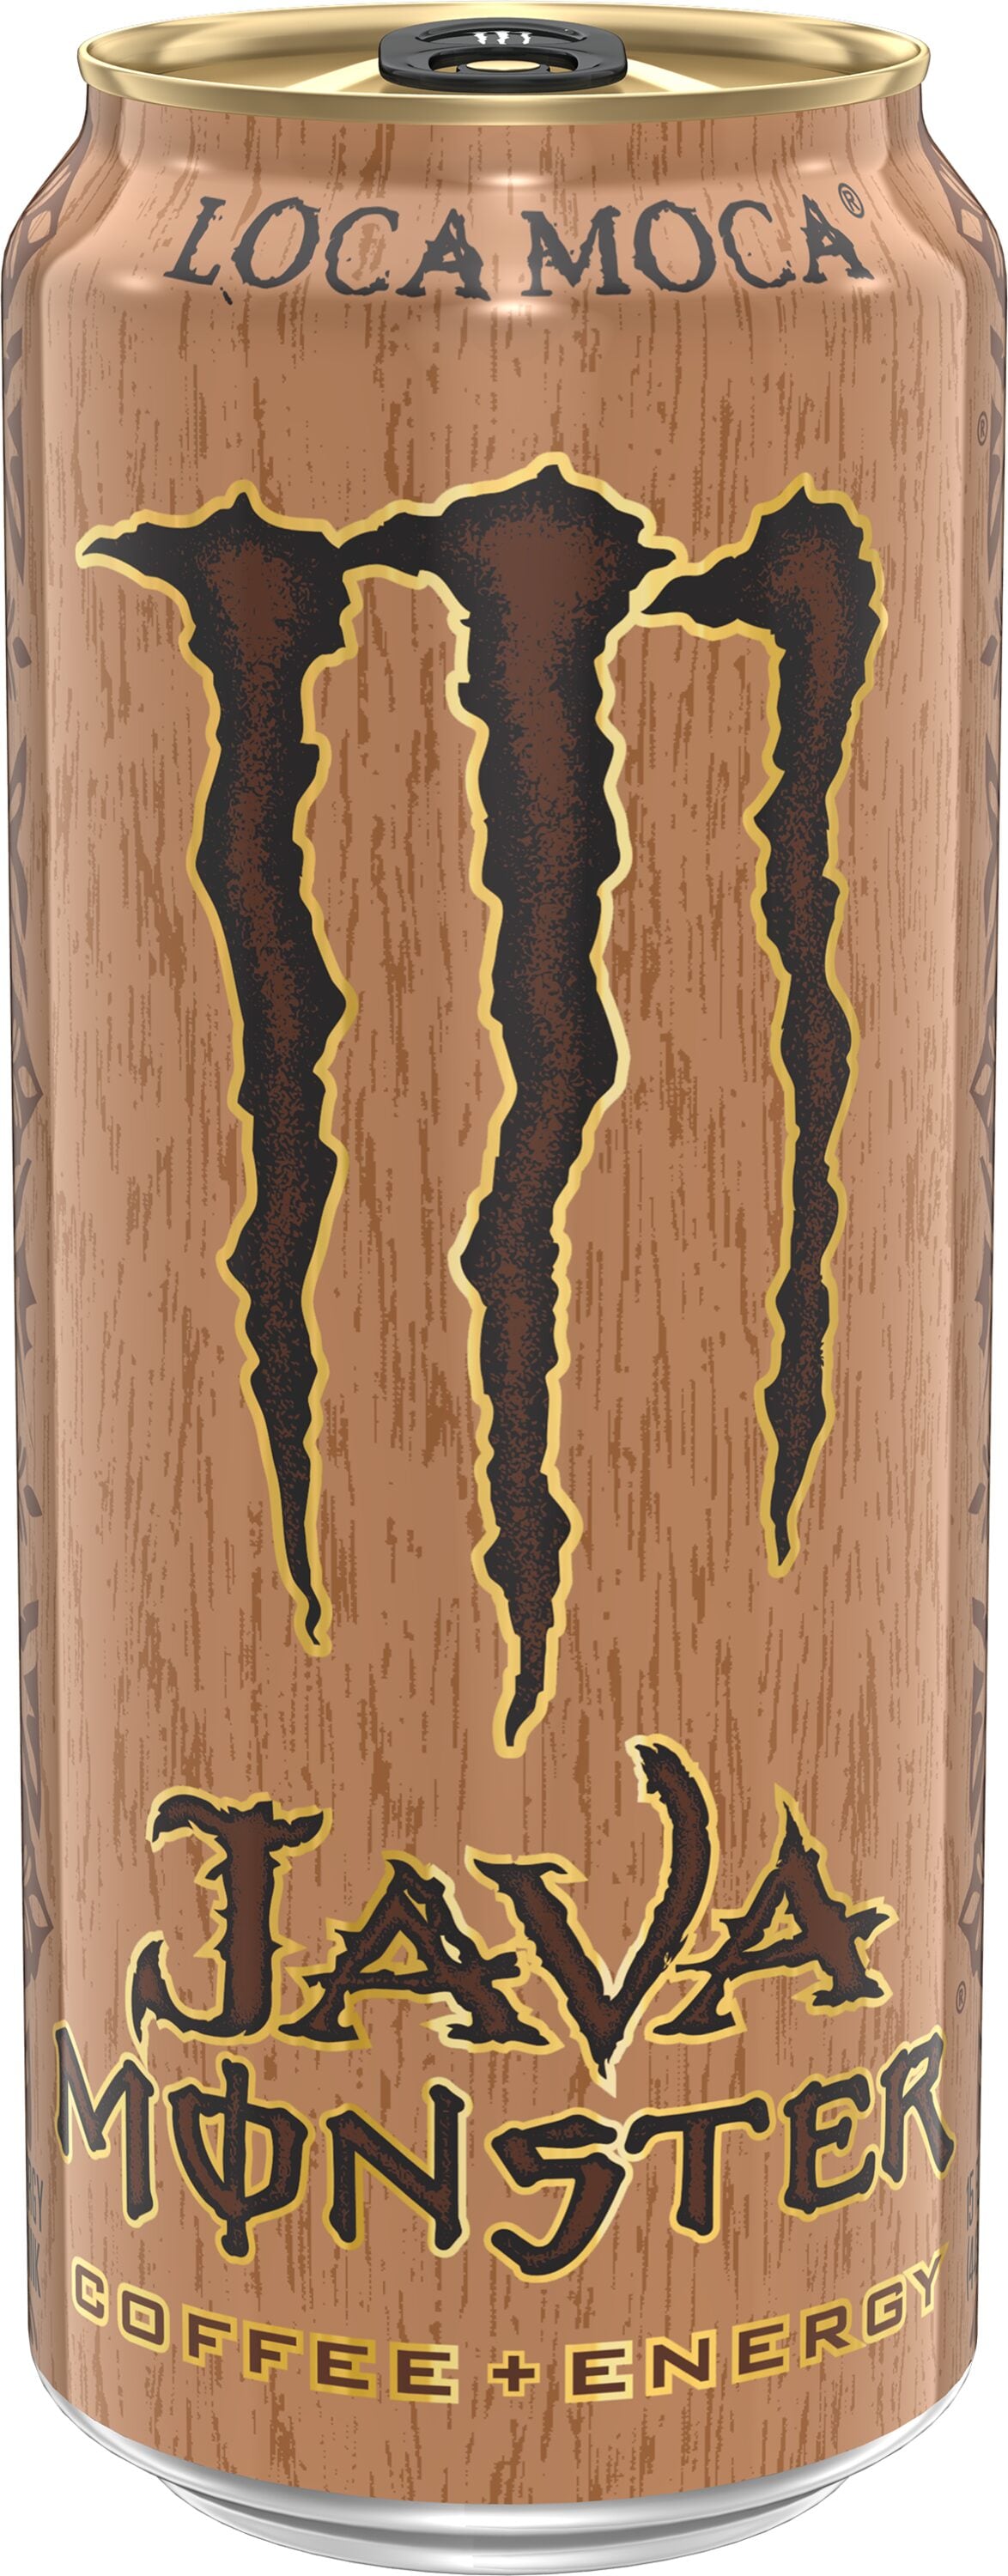 MONSTER ENERGY 16-fl oz Ultra Paradise Energy Drink in the Soft Drinks  department at